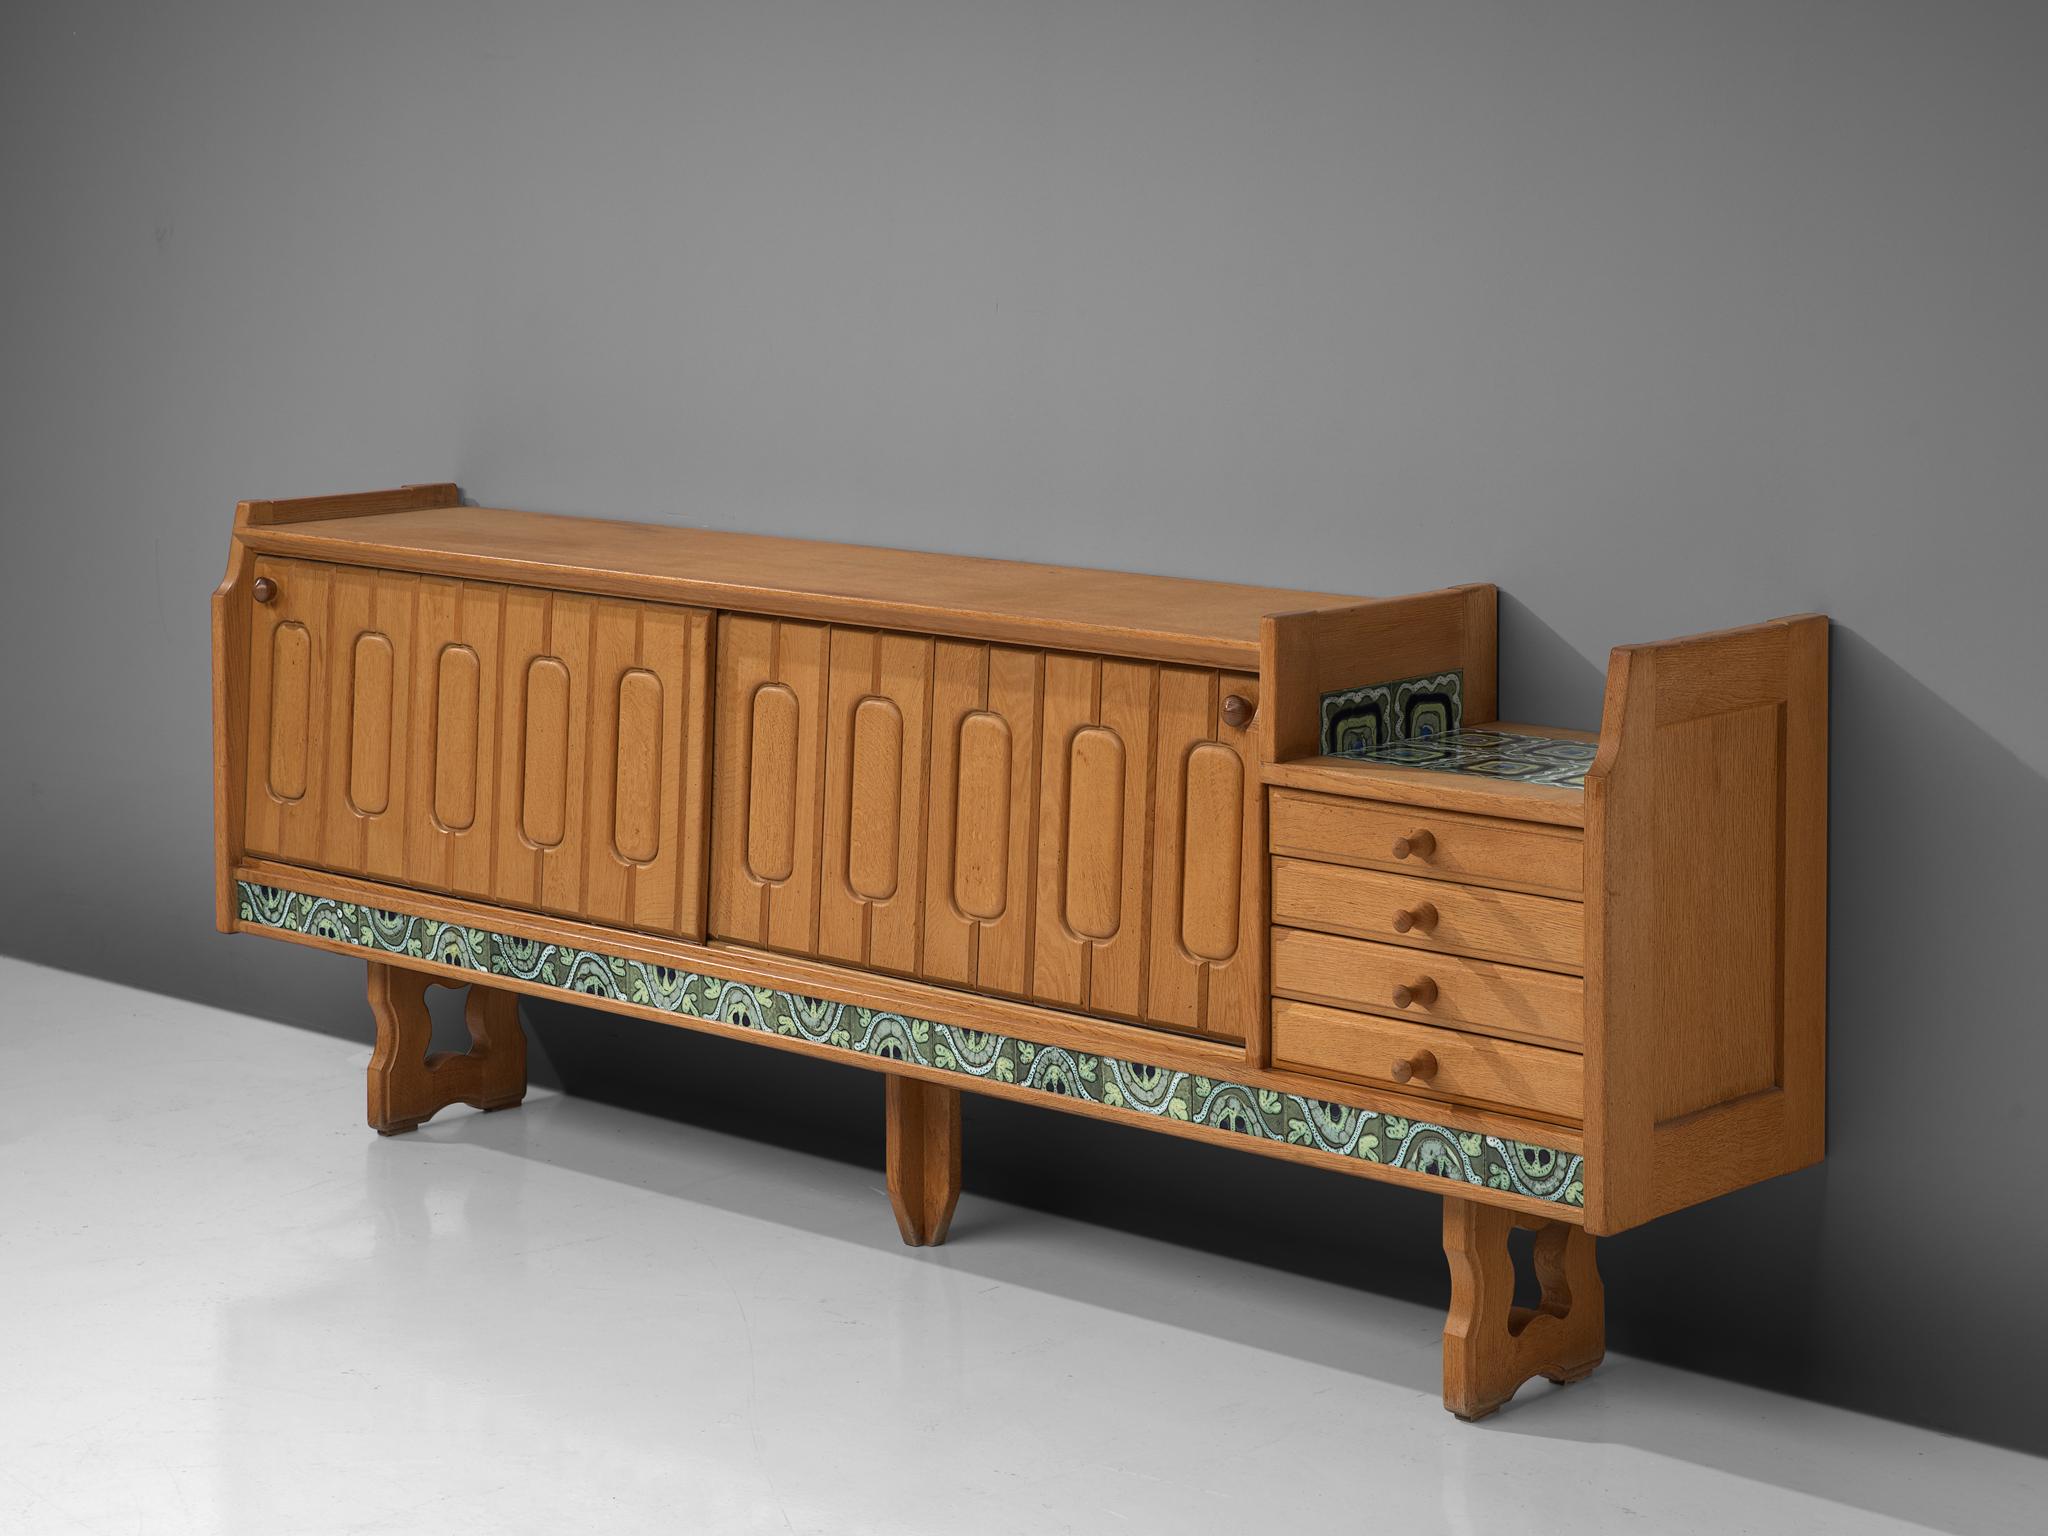 Guillerme et Chambron, Sideboard model Simon, oak and ceramic, France, 1960s.

Credenza in oak by French designers Guillerme & Chambron. This sideboard is equipped with two sliding-doors and a set of drawers. The front of the sideboard is